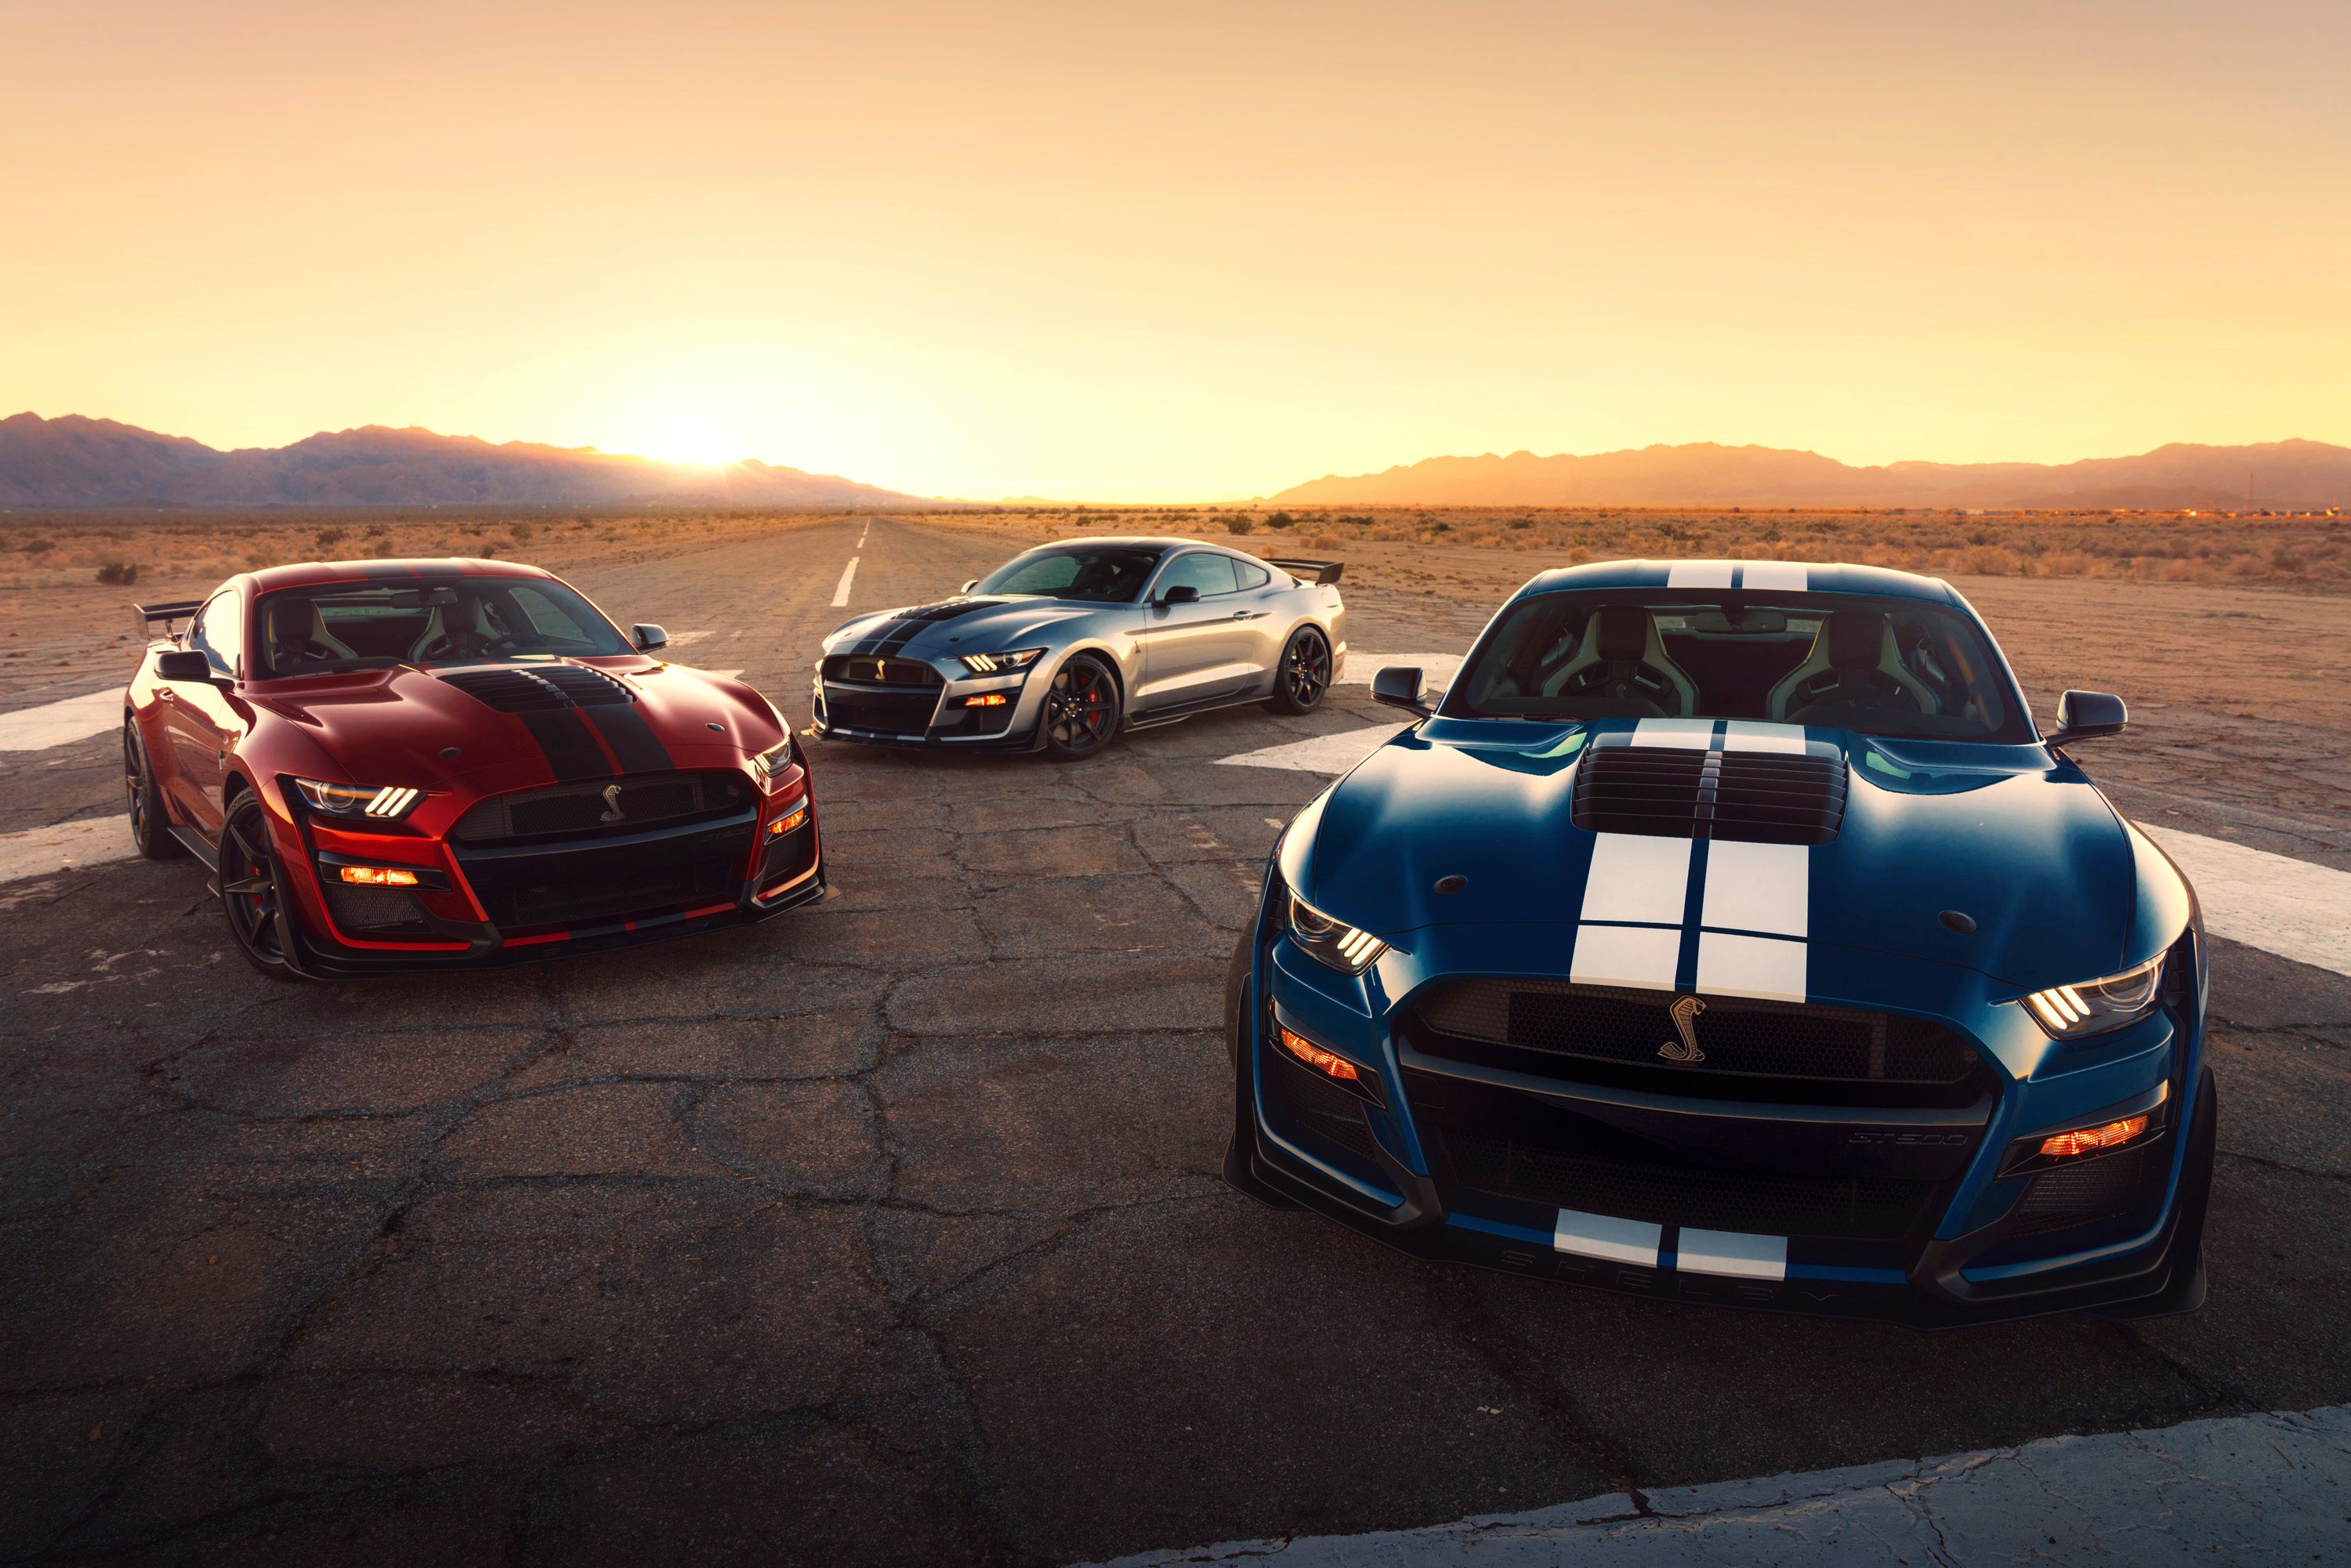 2022 10 Reasons Why No Automaker Can Beat the Ford Mustang Shelby GT500